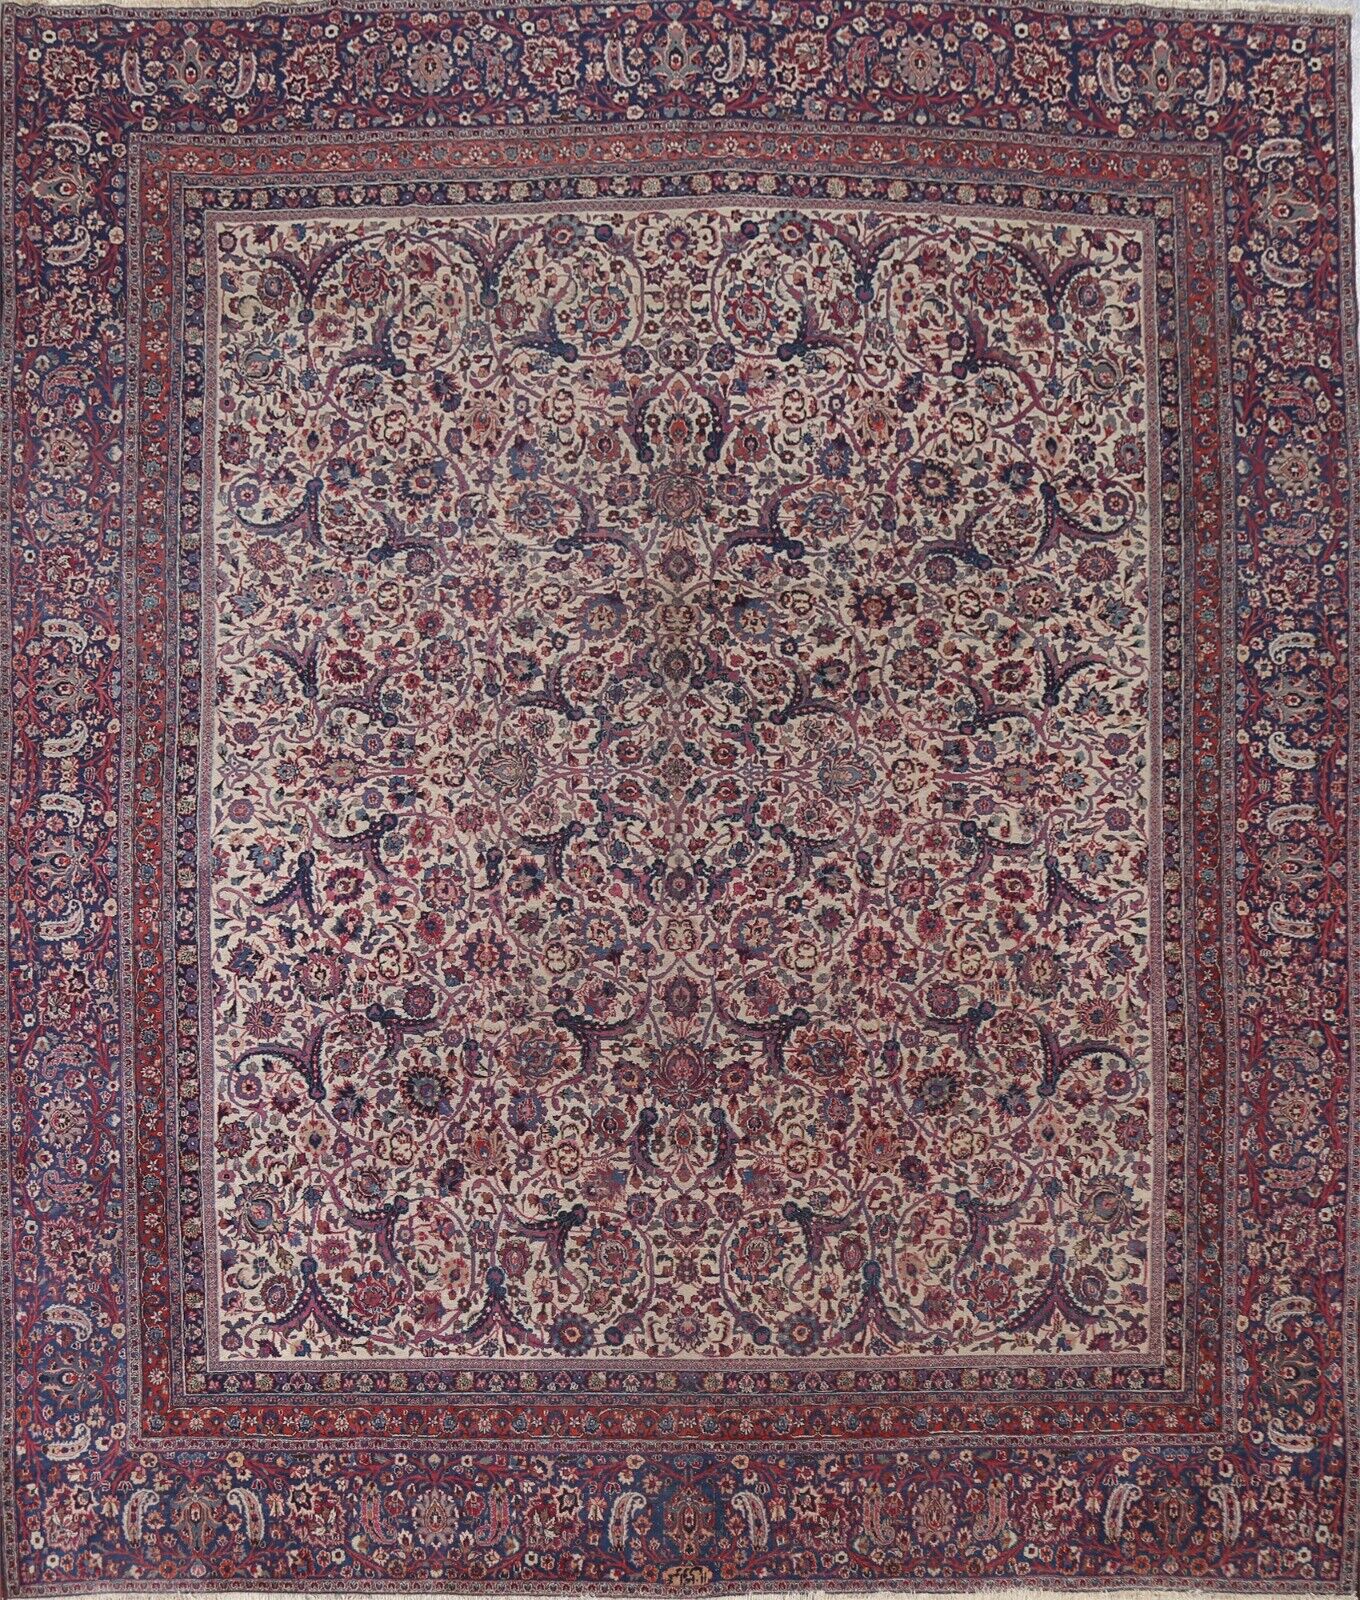 Pre-1900 ANTIQUE Ardakan Area Rug Vegetable Dye Hand-knotted Carpet Square 12x12